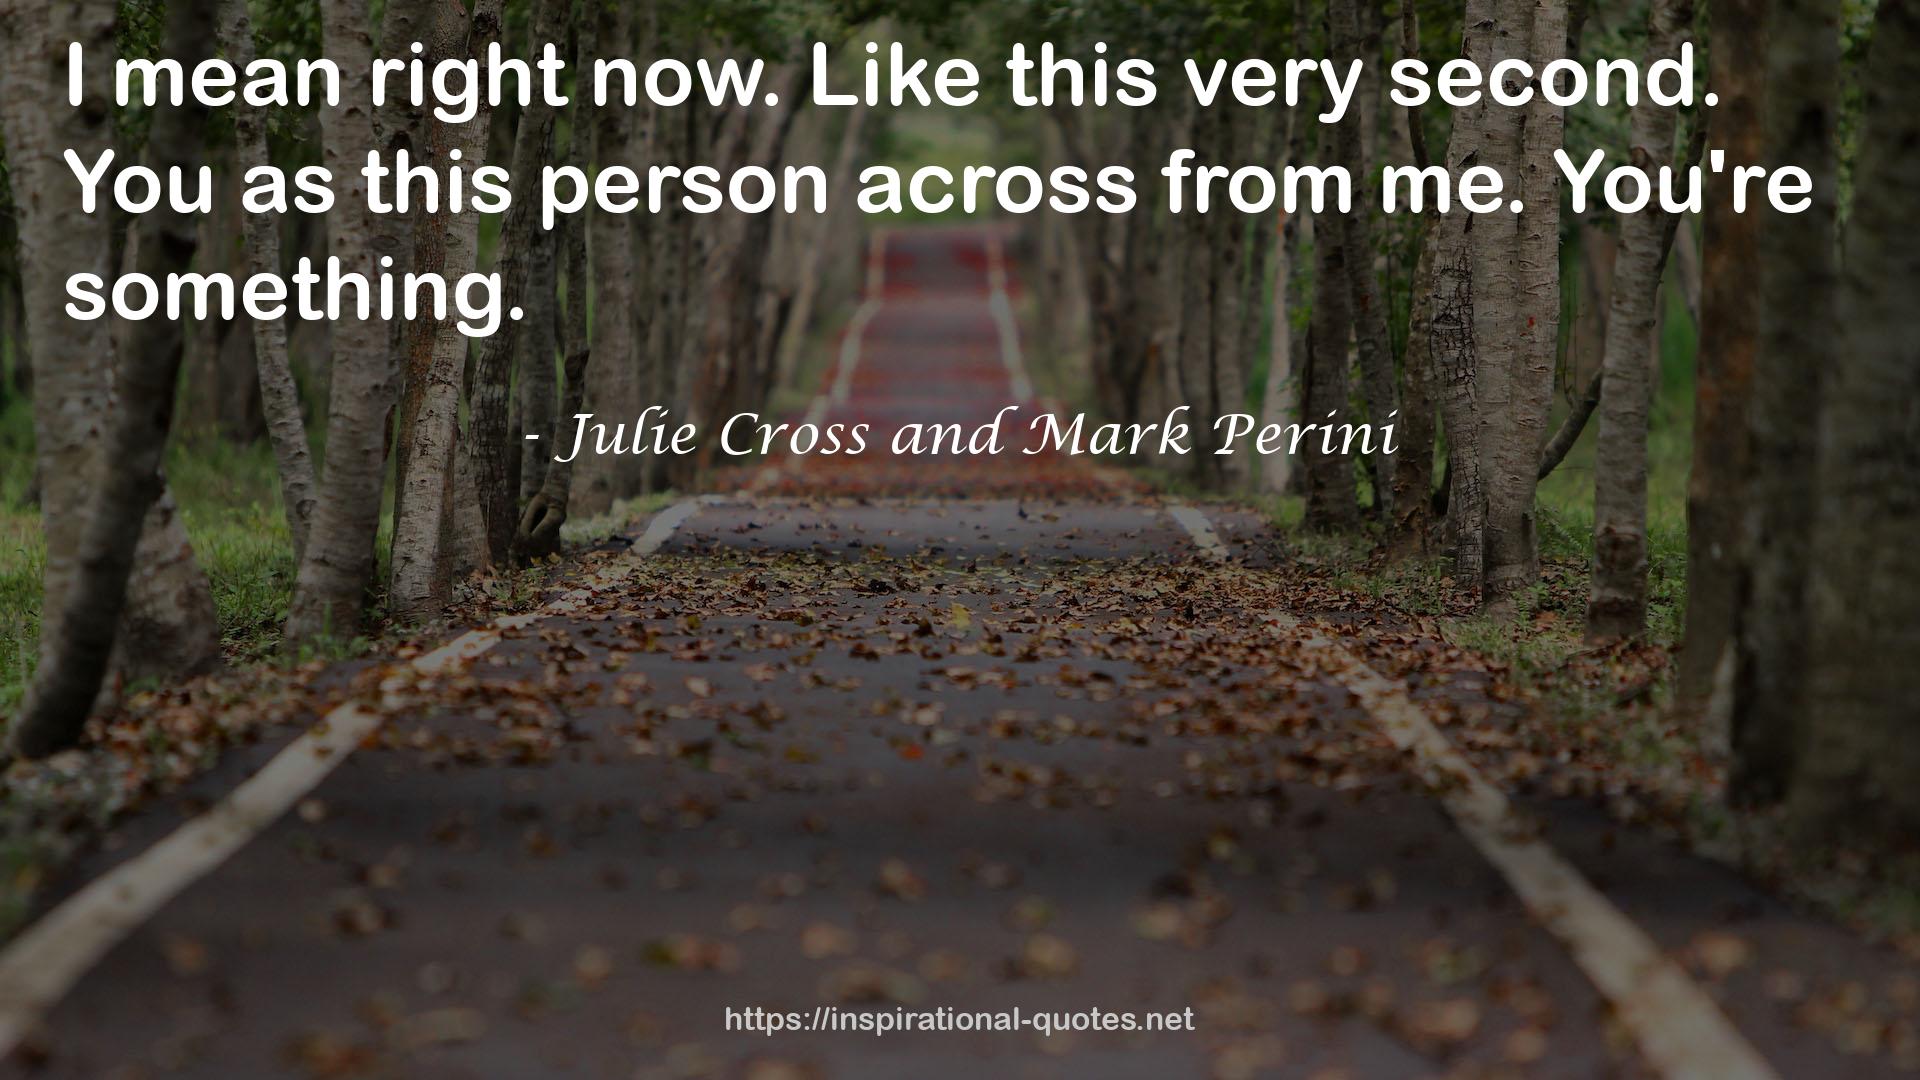 Julie Cross and Mark Perini QUOTES